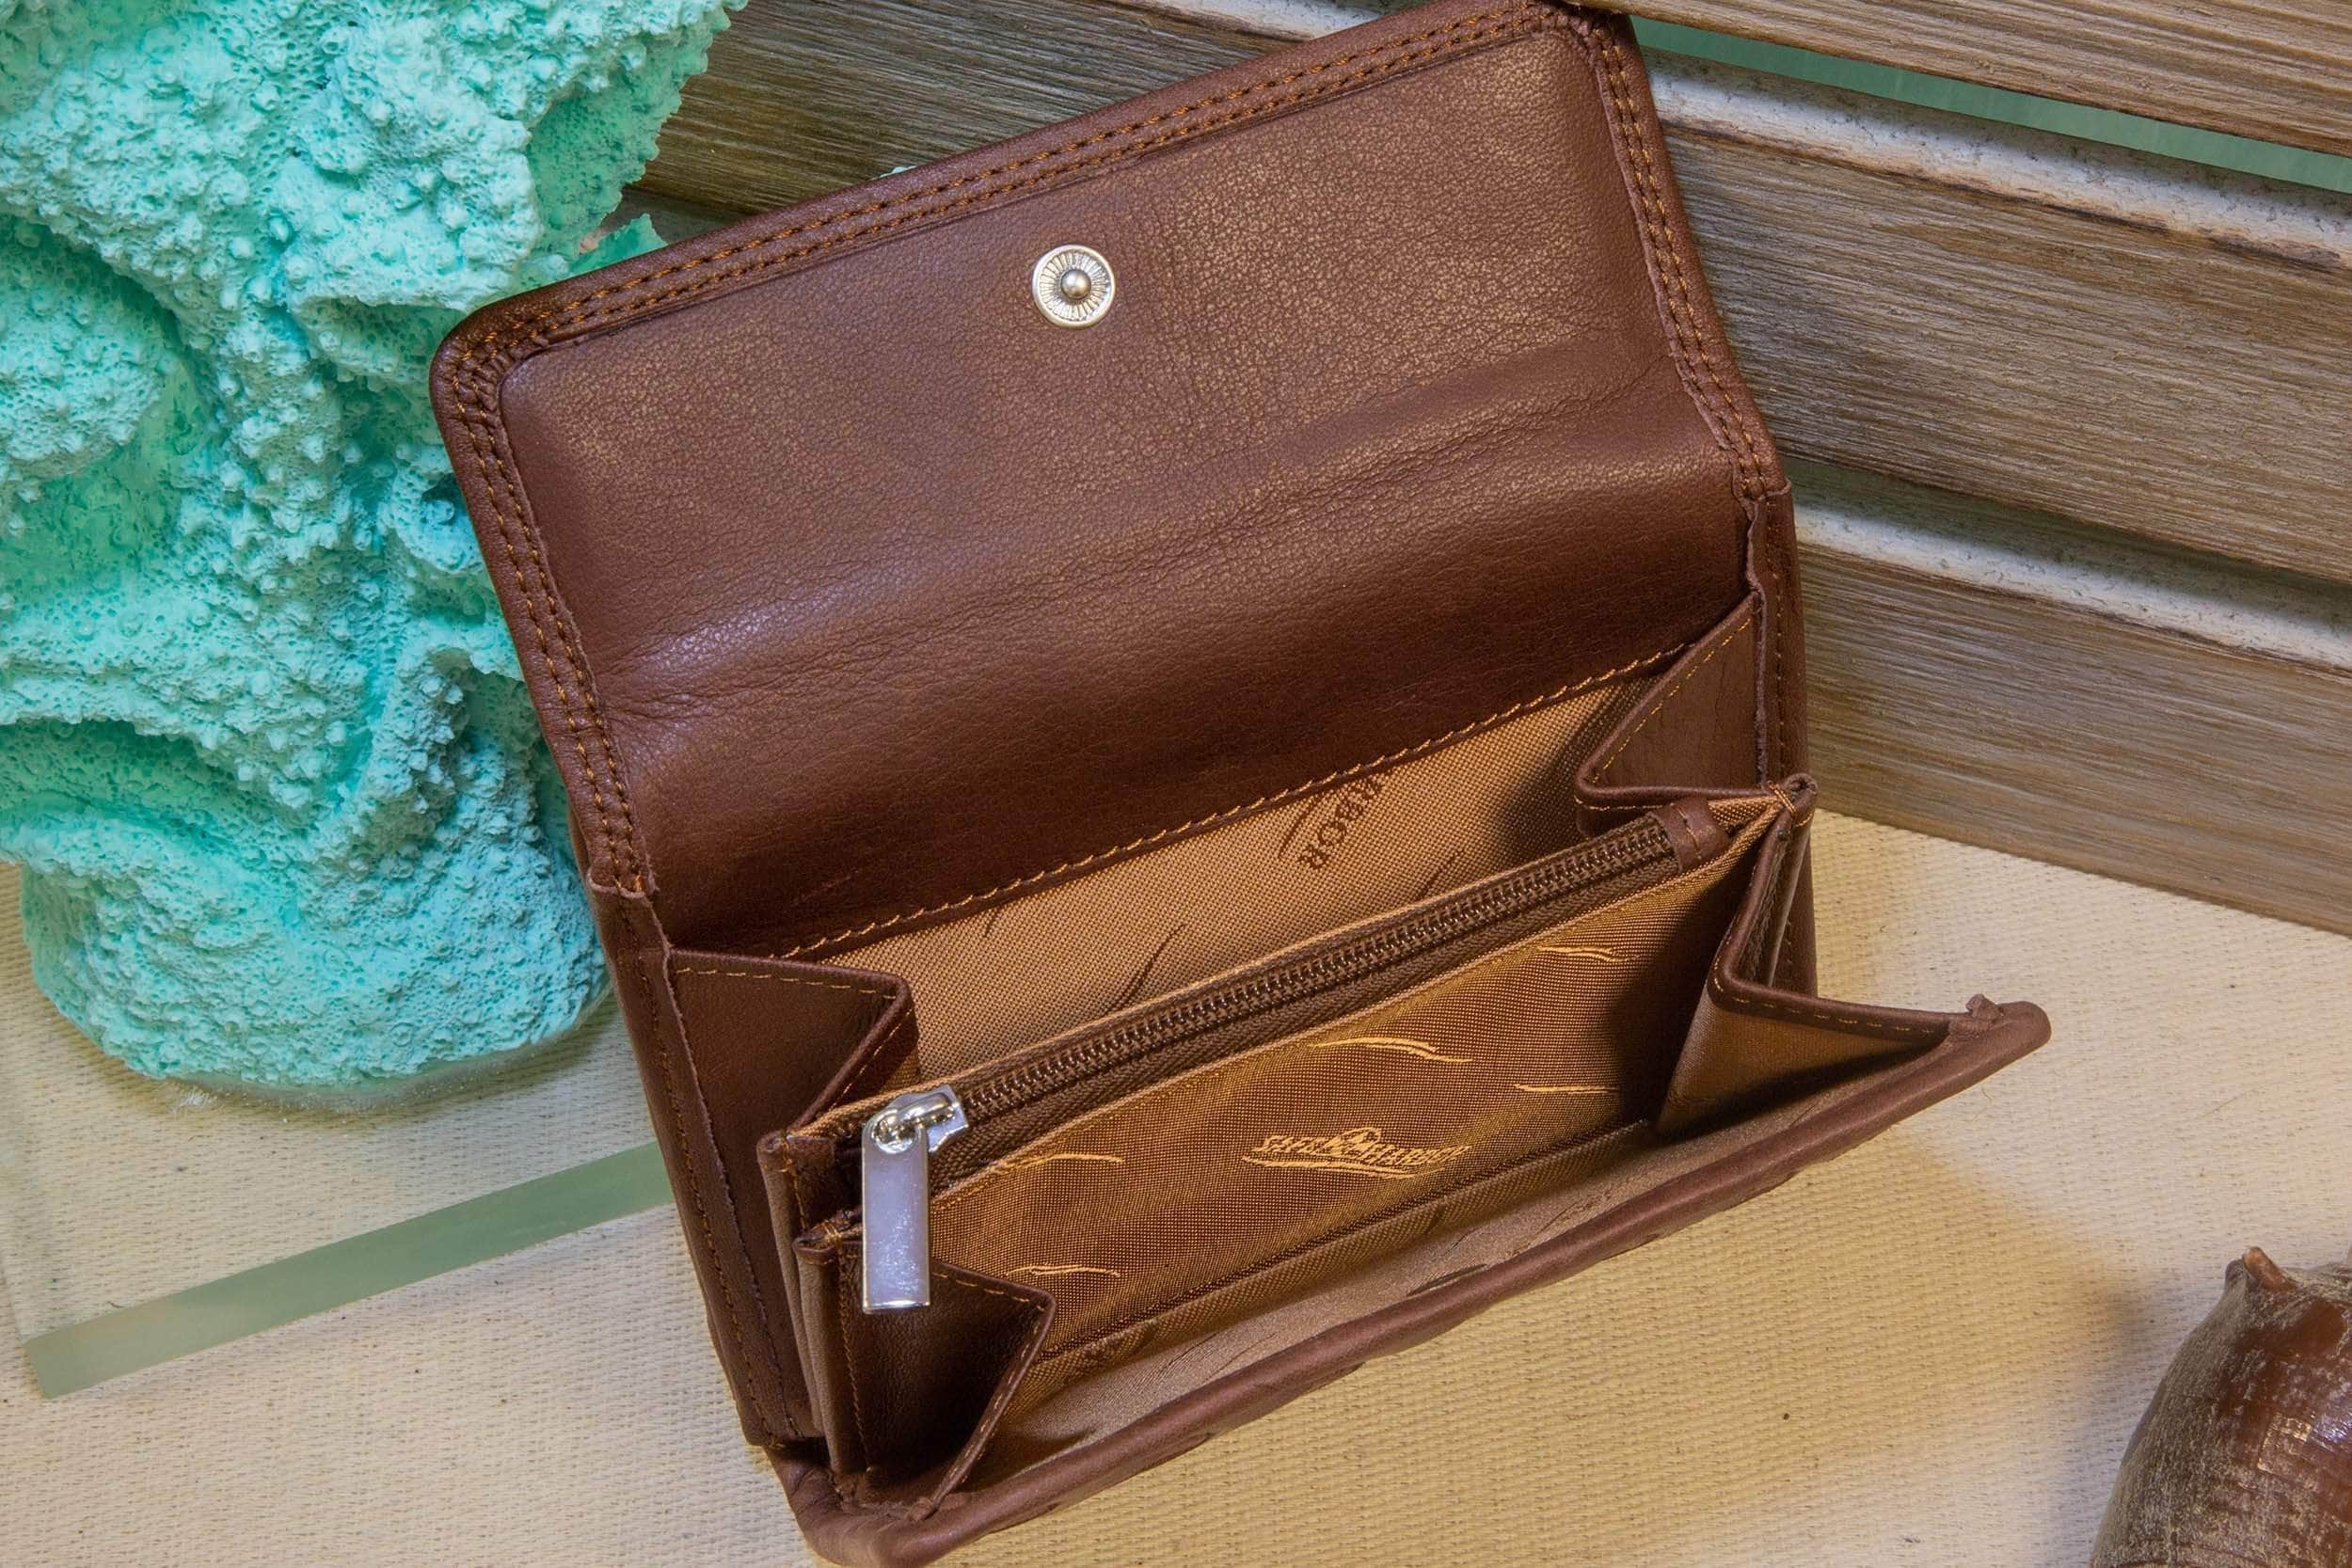 Leather Wallet With Wrist Strap, Ladies Leather Wallet Purse, Zip Around  Wallet, Brown Leather Wallet - Etsy